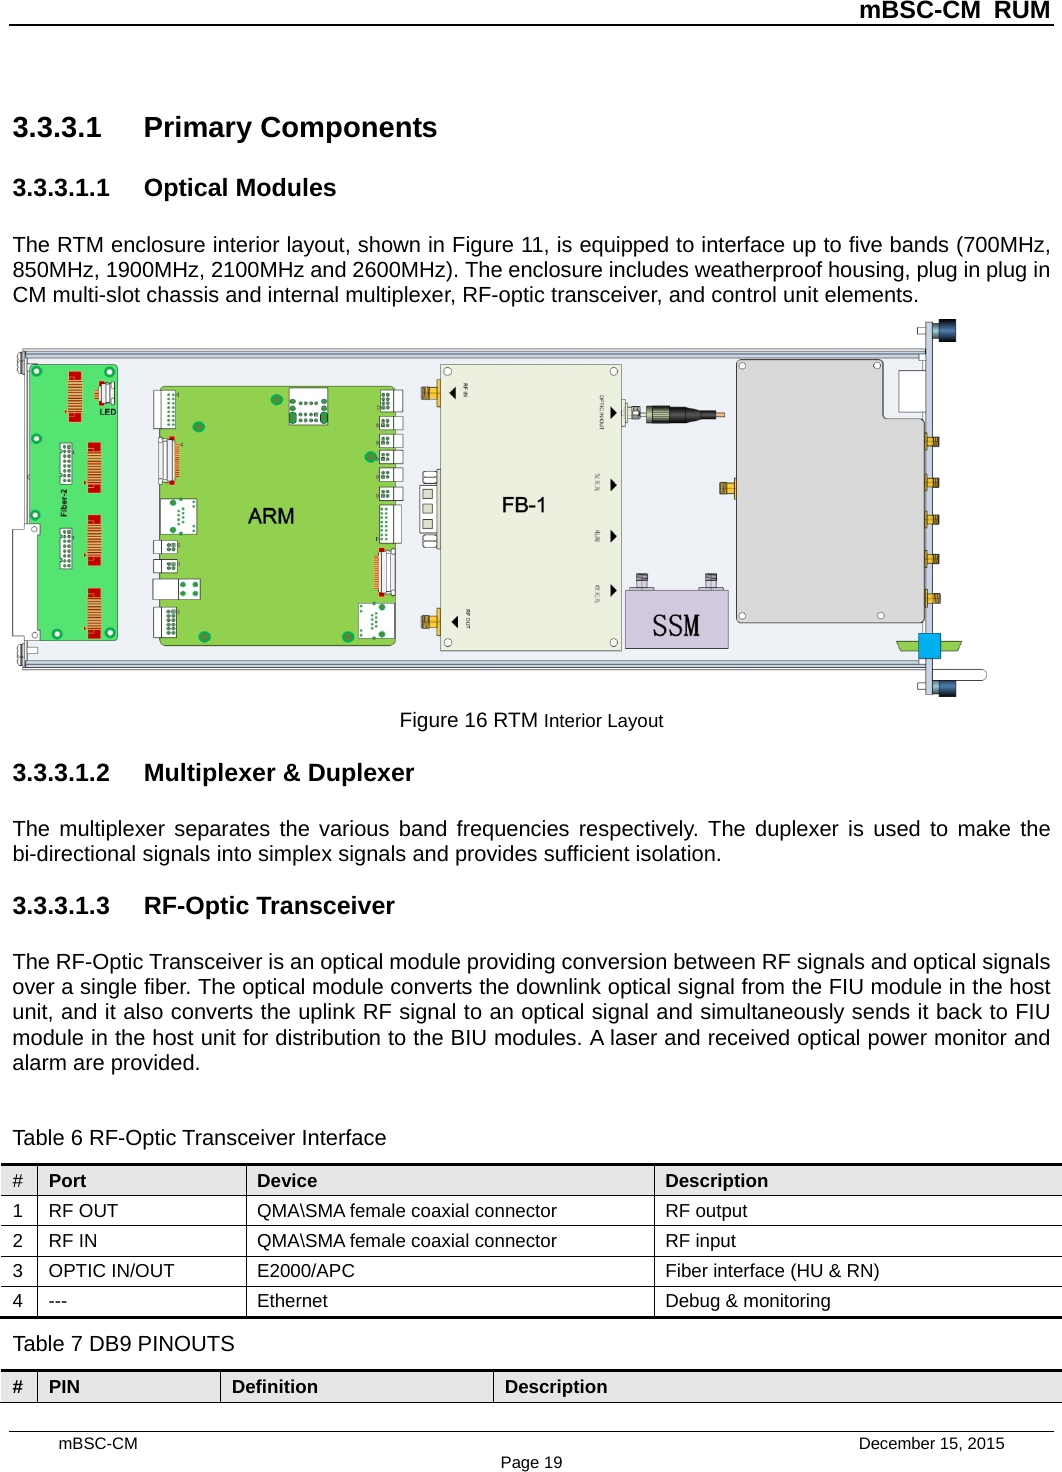          mBSC-CM RUM   mBSC-CM                                 December 15, 2015 Page 19 3.3.3.1 Primary Components 3.3.3.1.1 Optical Modules The RTM enclosure interior layout, shown in Figure 11, is equipped to interface up to five bands (700MHz, 850MHz, 1900MHz, 2100MHz and 2600MHz). The enclosure includes weatherproof housing, plug in plug in CM multi-slot chassis and internal multiplexer, RF-optic transceiver, and control unit elements.  Figure 16 RTM Interior Layout 3.3.3.1.2 Multiplexer &amp; Duplexer The multiplexer separates the various band frequencies respectively. The duplexer is used to make the bi-directional signals into simplex signals and provides sufficient isolation. 3.3.3.1.3 RF-Optic Transceiver The RF-Optic Transceiver is an optical module providing conversion between RF signals and optical signals over a single fiber. The optical module converts the downlink optical signal from the FIU module in the host unit, and it also converts the uplink RF signal to an optical signal and simultaneously sends it back to FIU module in the host unit for distribution to the BIU modules. A laser and received optical power monitor and alarm are provided.  Table 6 RF-Optic Transceiver Interface #  Port Device Description 1  RF OUT  QMA\SMA female coaxial connector RF output 2  RF IN  QMA\SMA female coaxial connector RF input 3  OPTIC IN/OUT   E2000/APC  Fiber interface (HU &amp; RN) 4  ---  Ethernet Debug &amp; monitoring   Table 7 DB9 PINOUTS #  PIN  Definition Description 